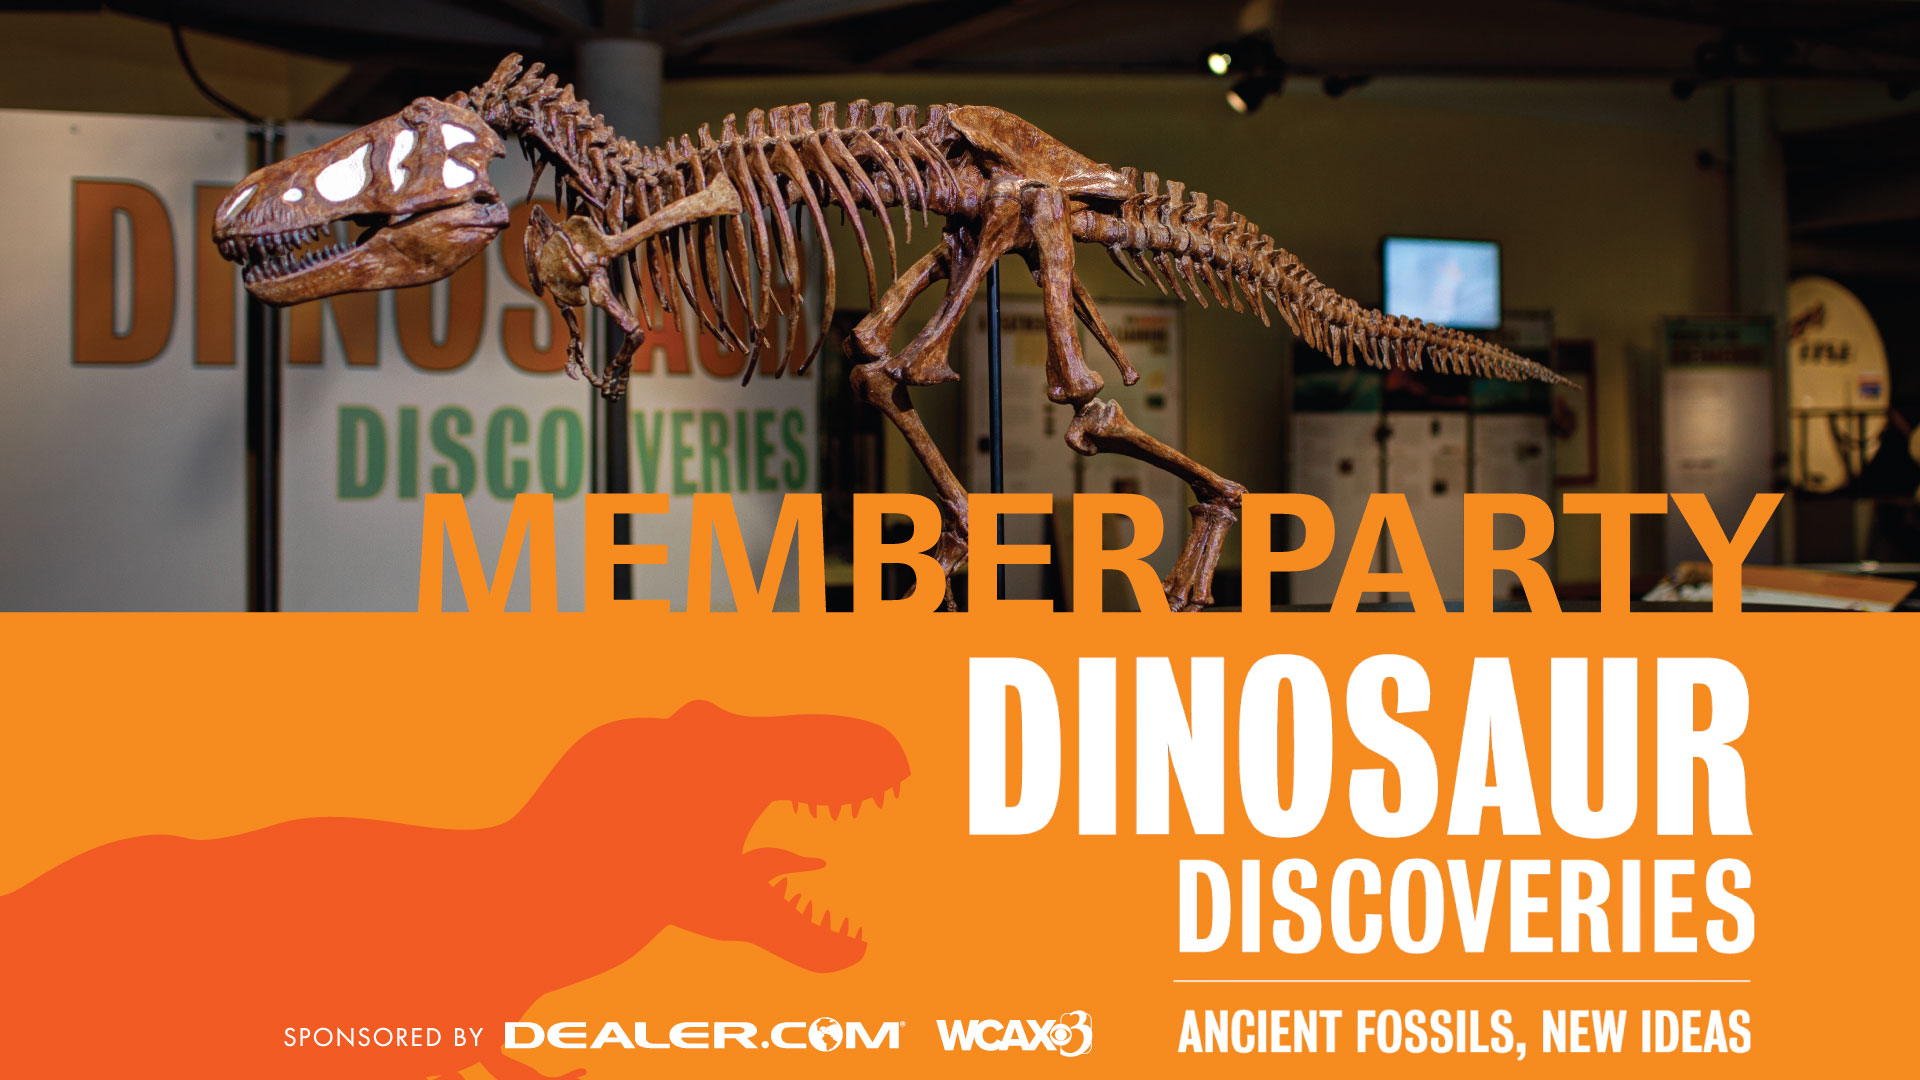 Photo of a Trex skeleton from the Dino Discoveries exhibit. Image also has the words "DINOSAUR DISCOVERIES, MEMBER PREVIEW PARTY" and the ECHO logo.